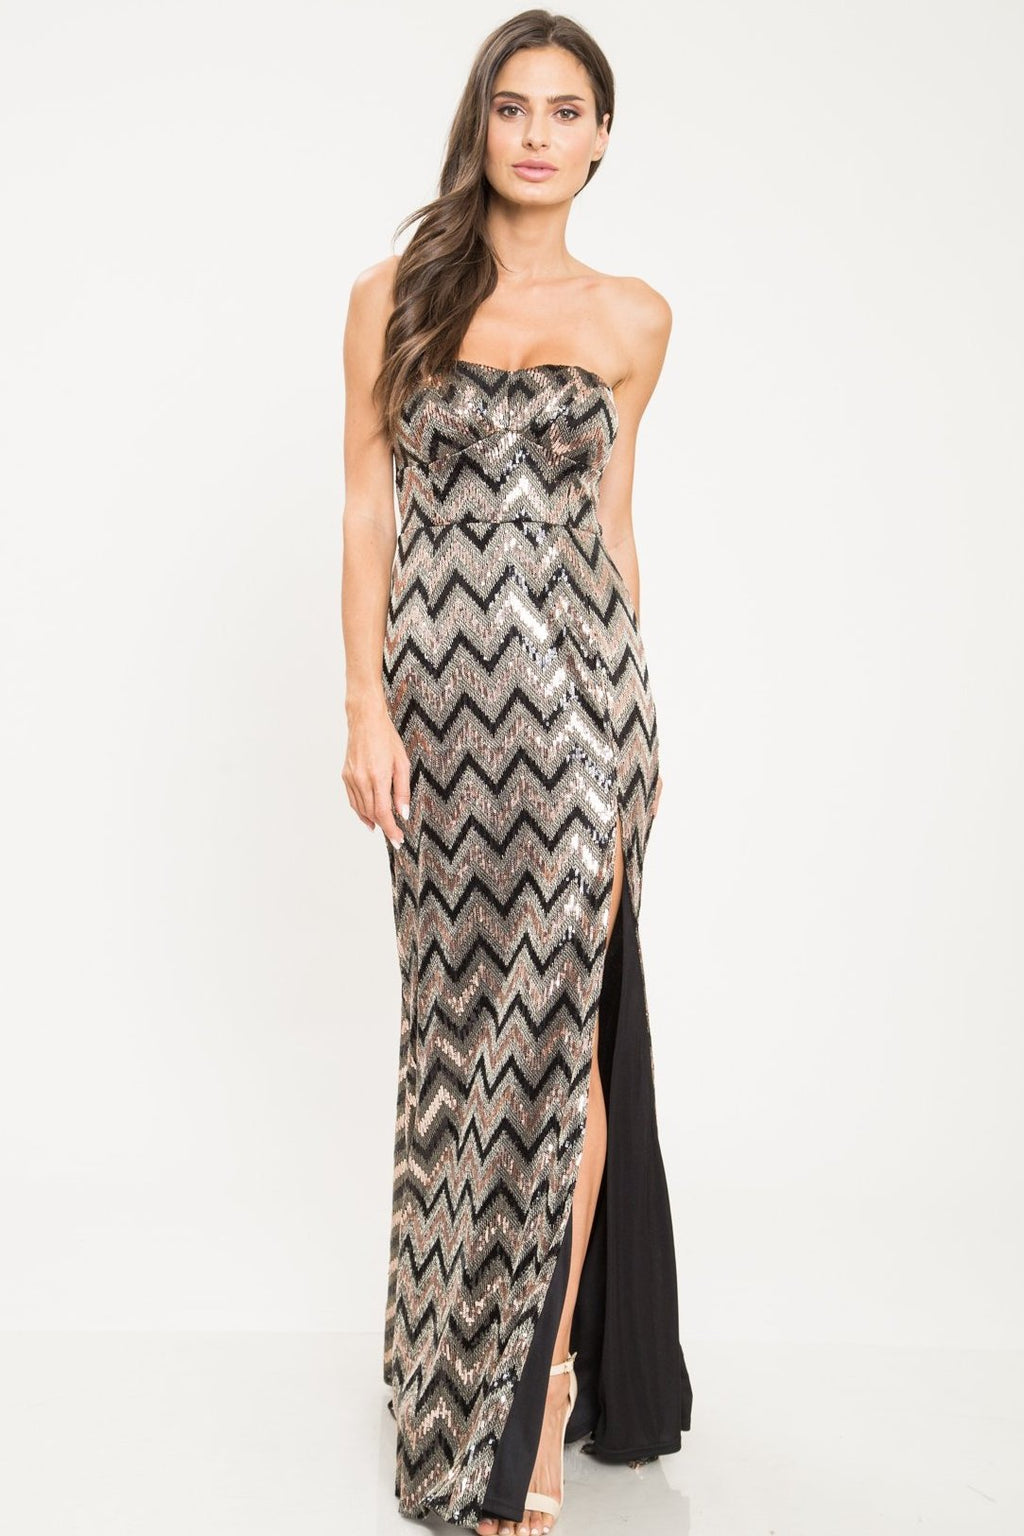 All Over You Sequin Gown